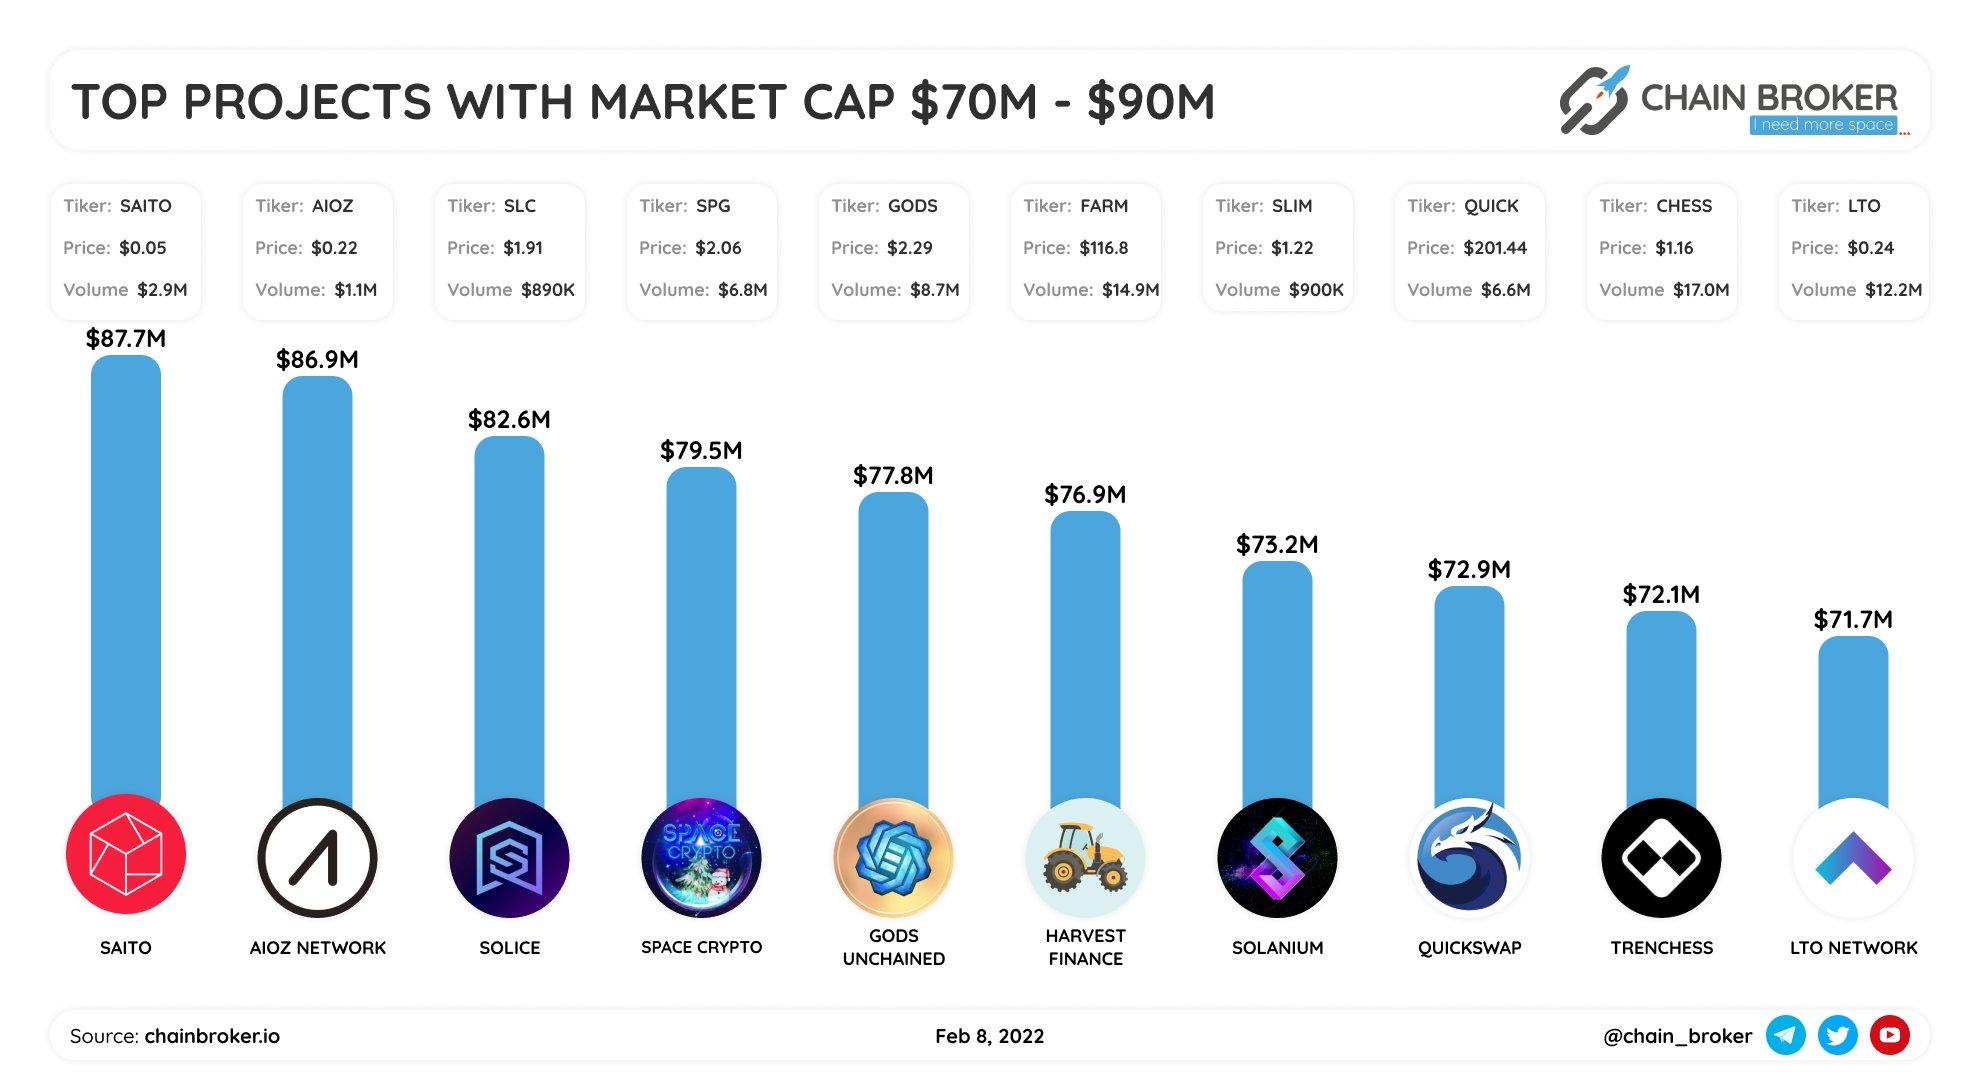 Top projects with market cap $70M-$90M